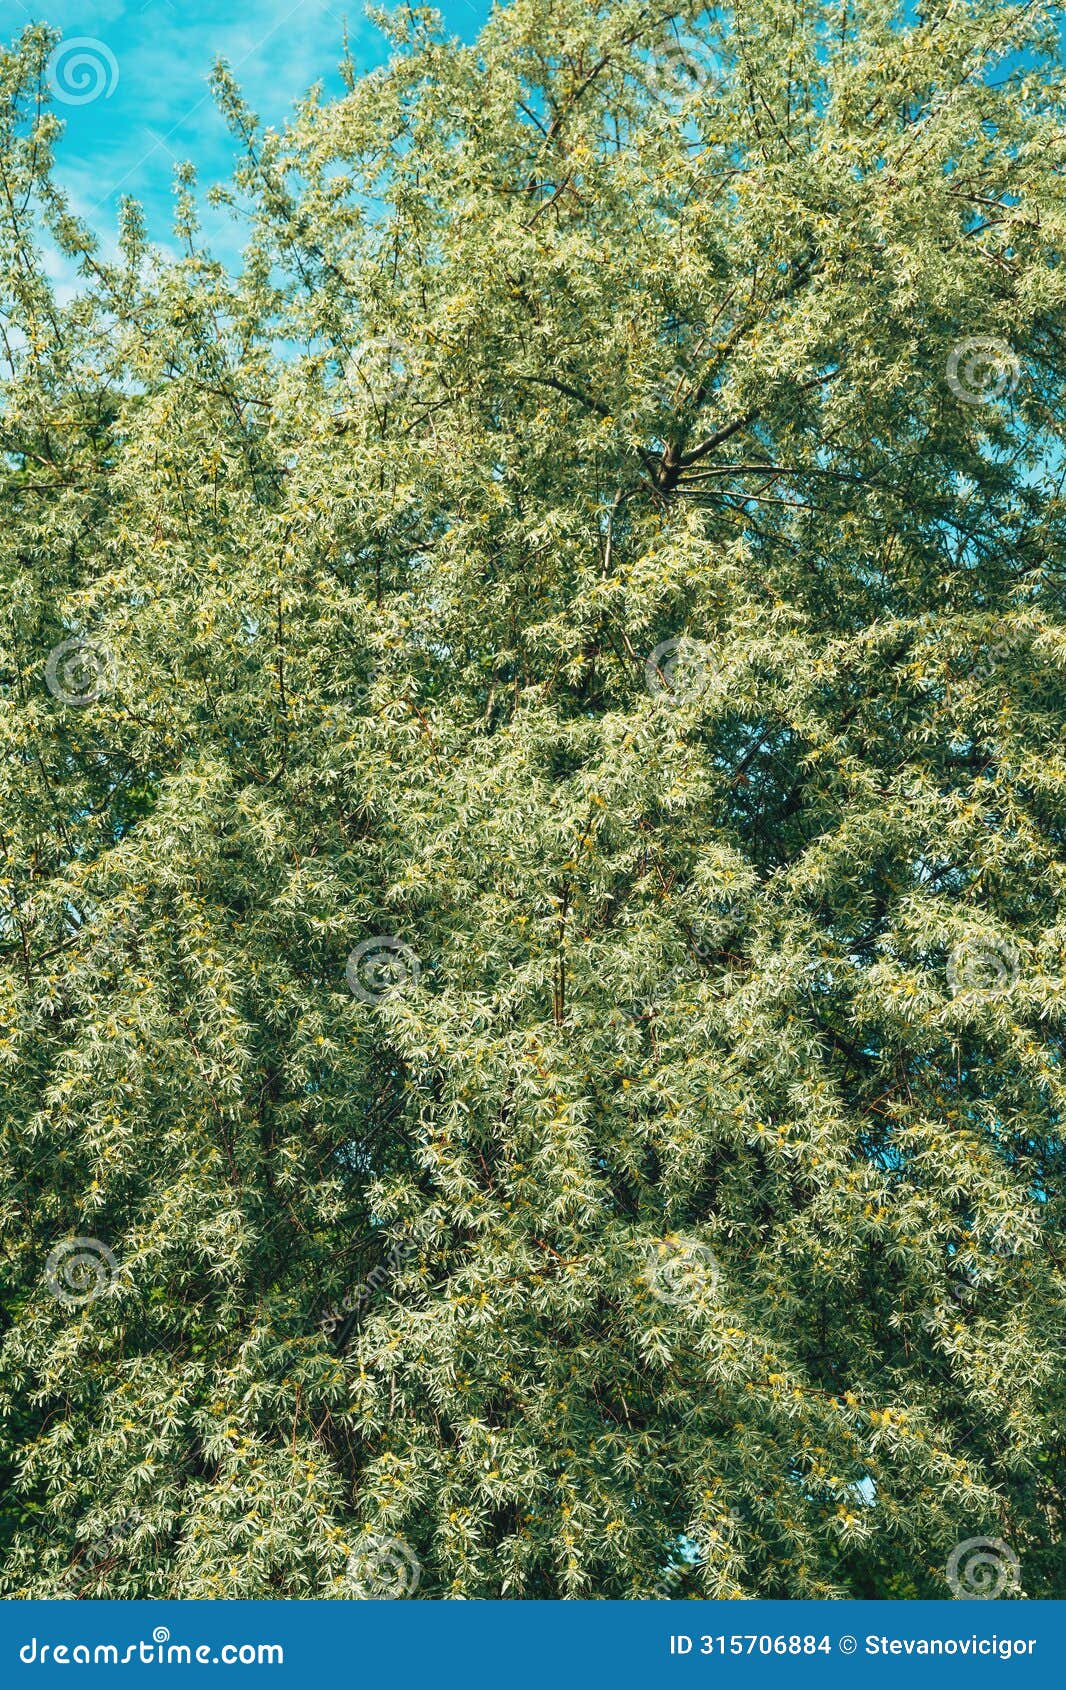 russian olive treetop in spring